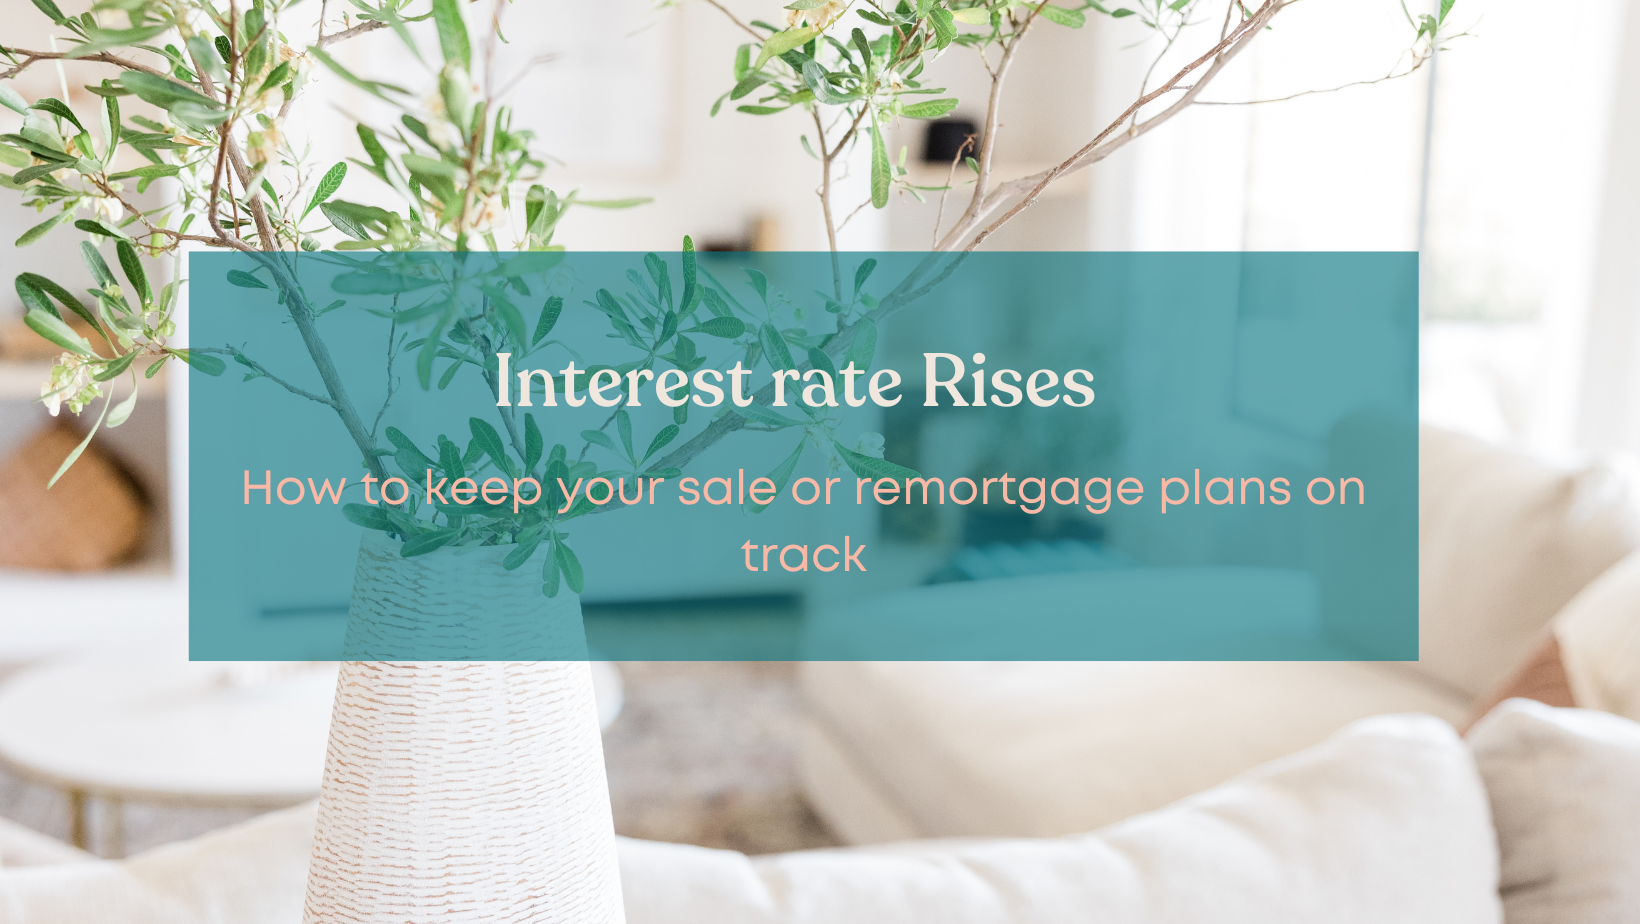 Interest Rate Rises, keeping your plans on track